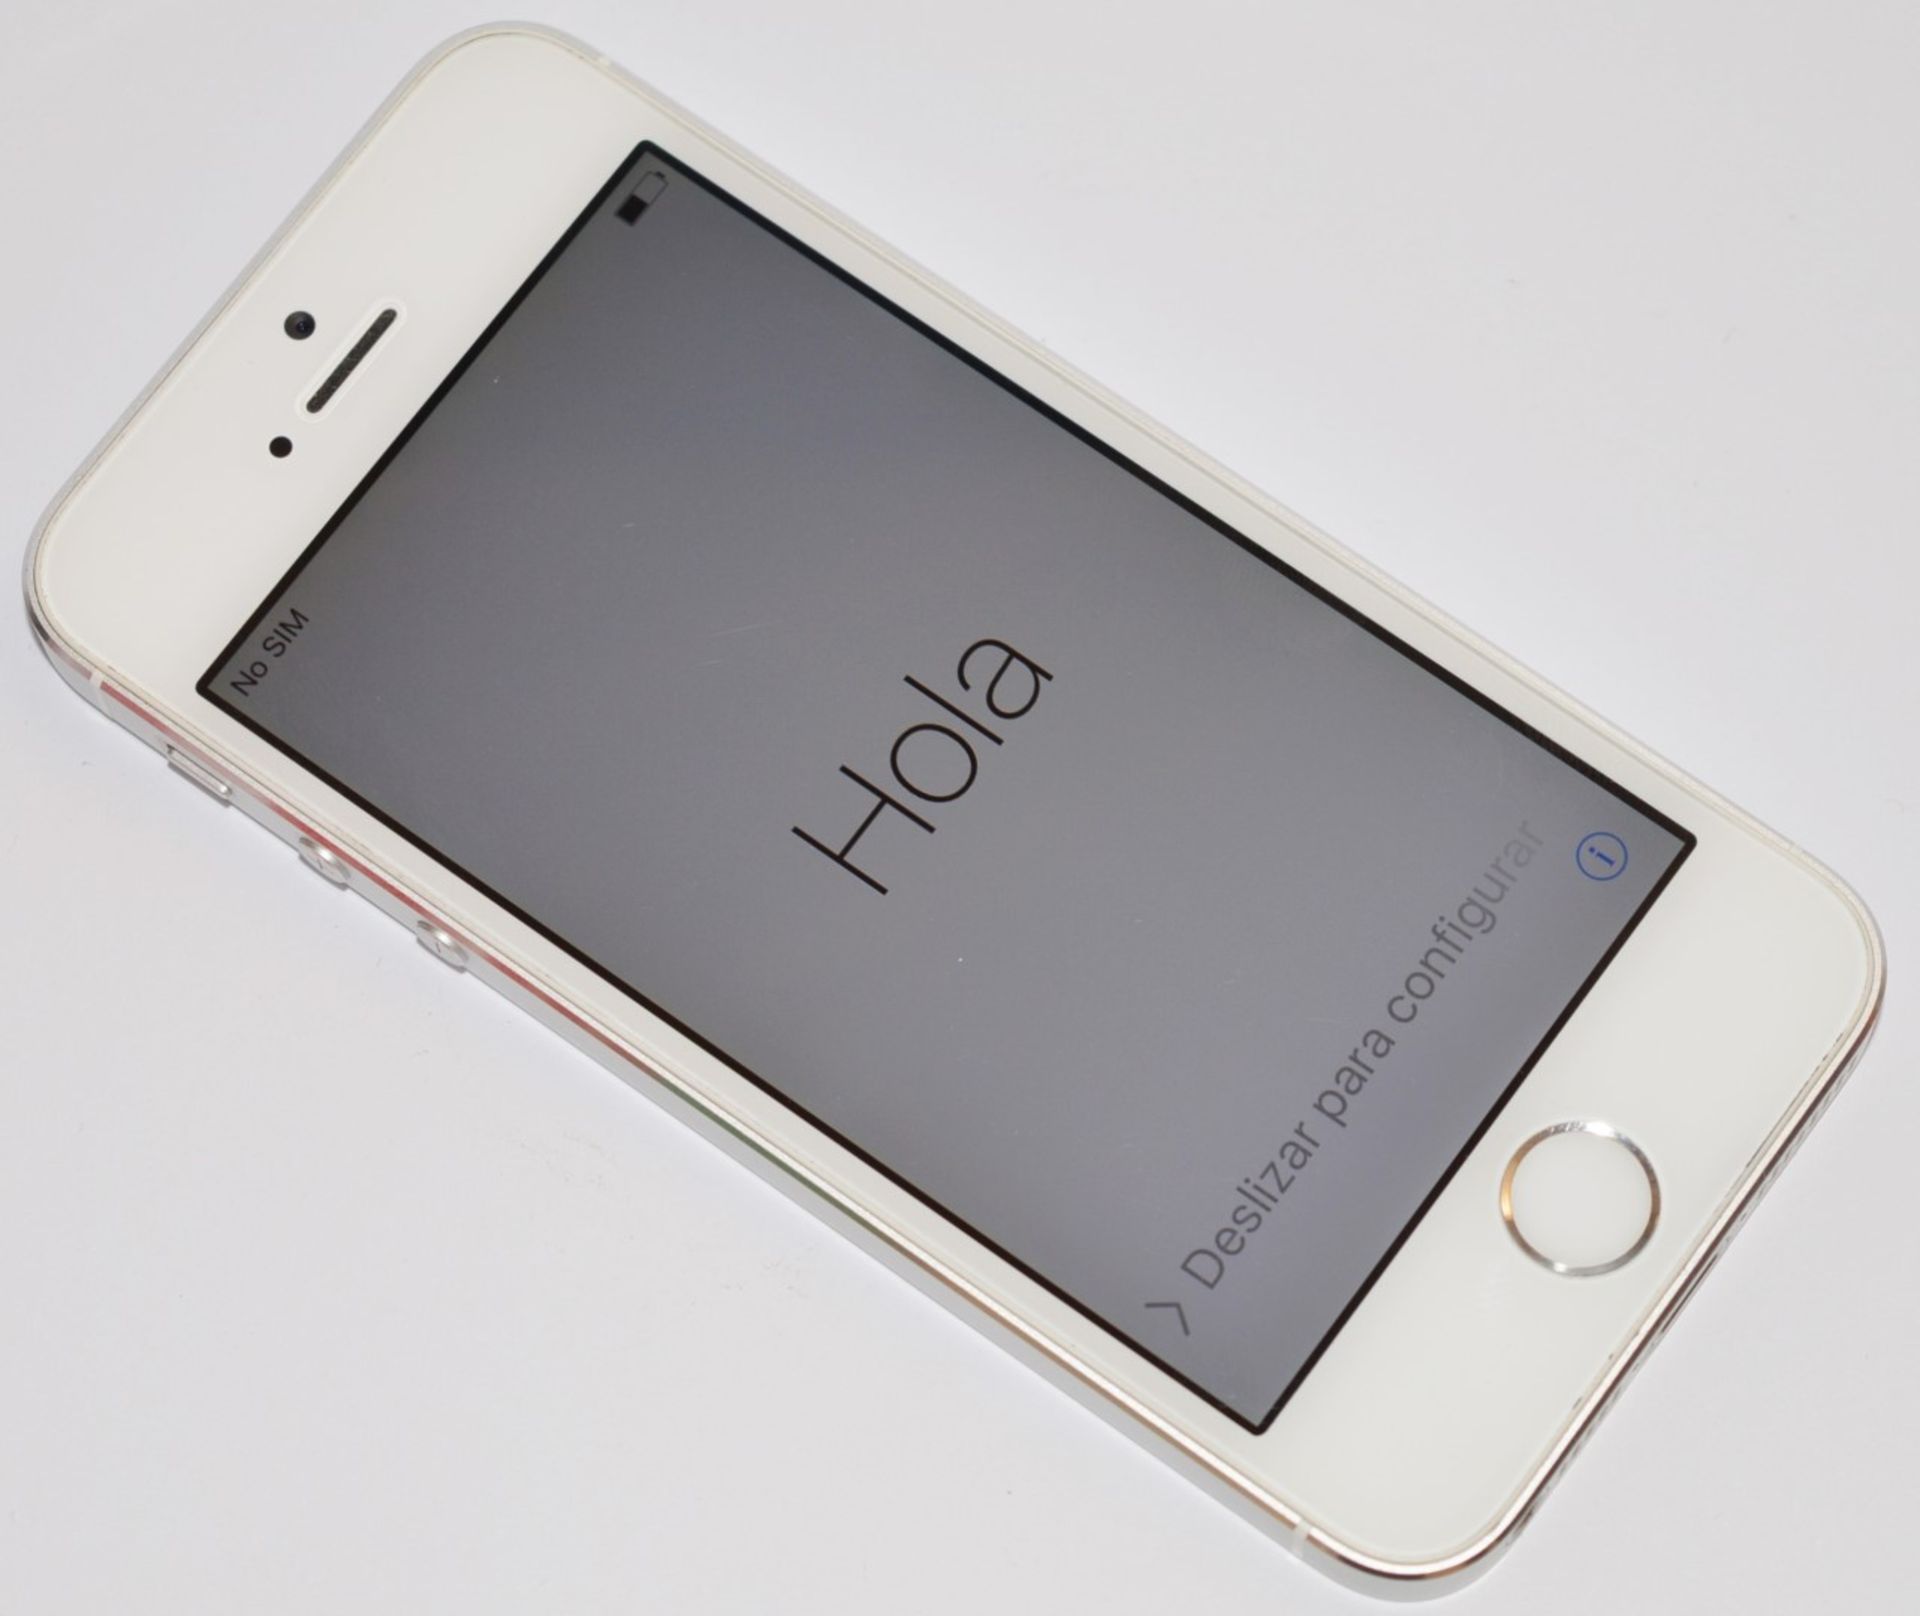 1 x Apple Iphone 5S White 32gb Mobile Phone - Model A1457 - Excellent Cosmetic Condition - Good